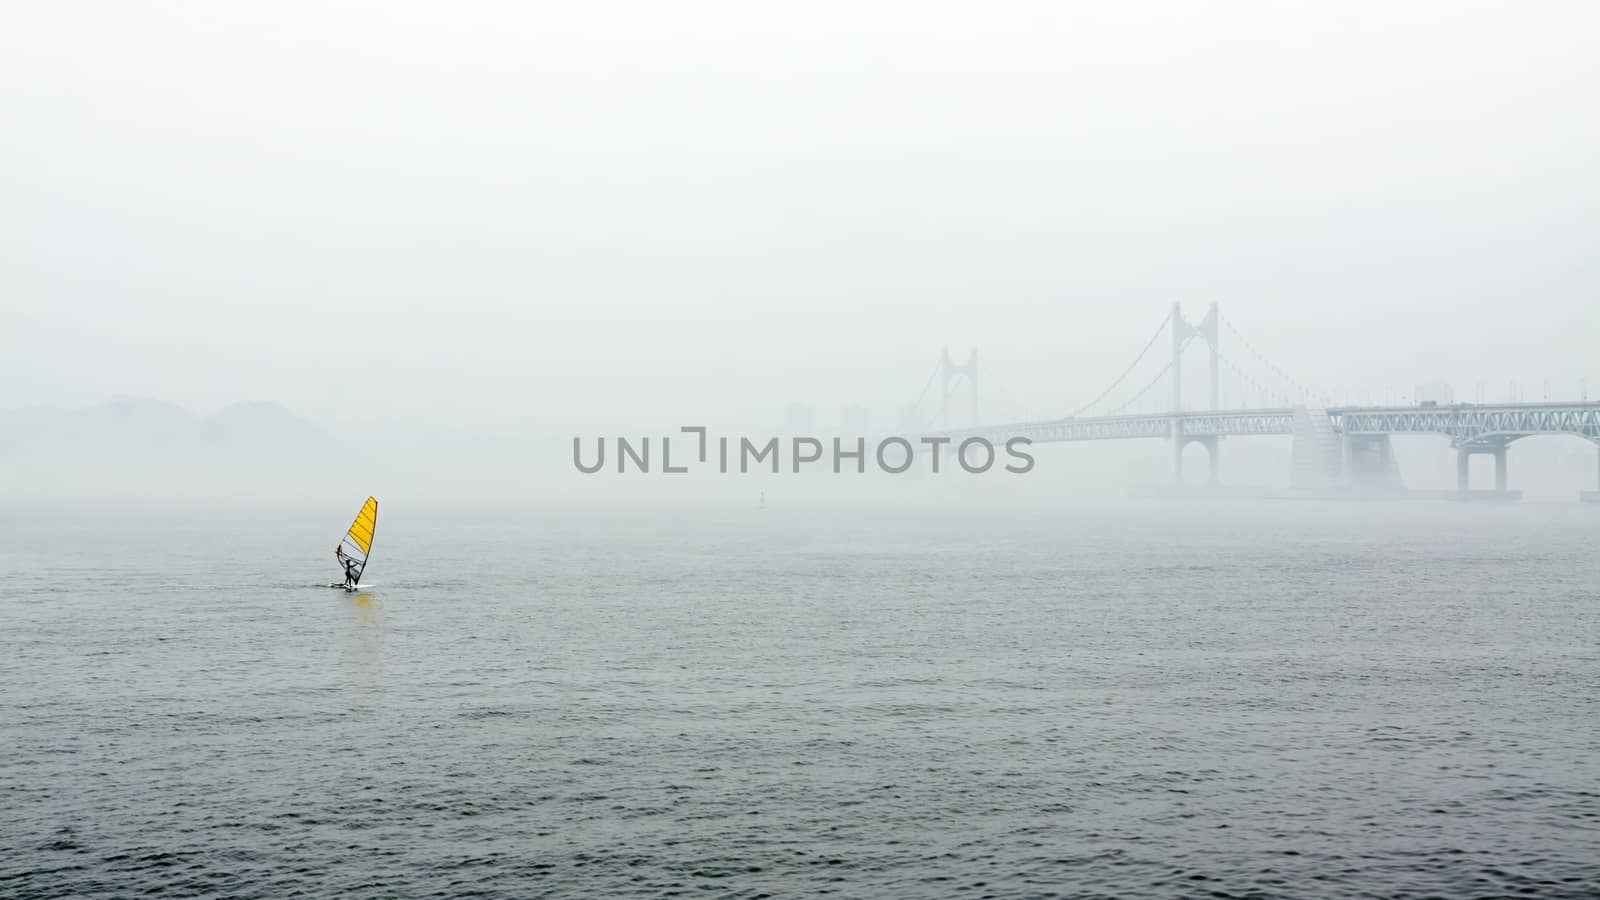 Misty landscape with river, bridge and yellow sail